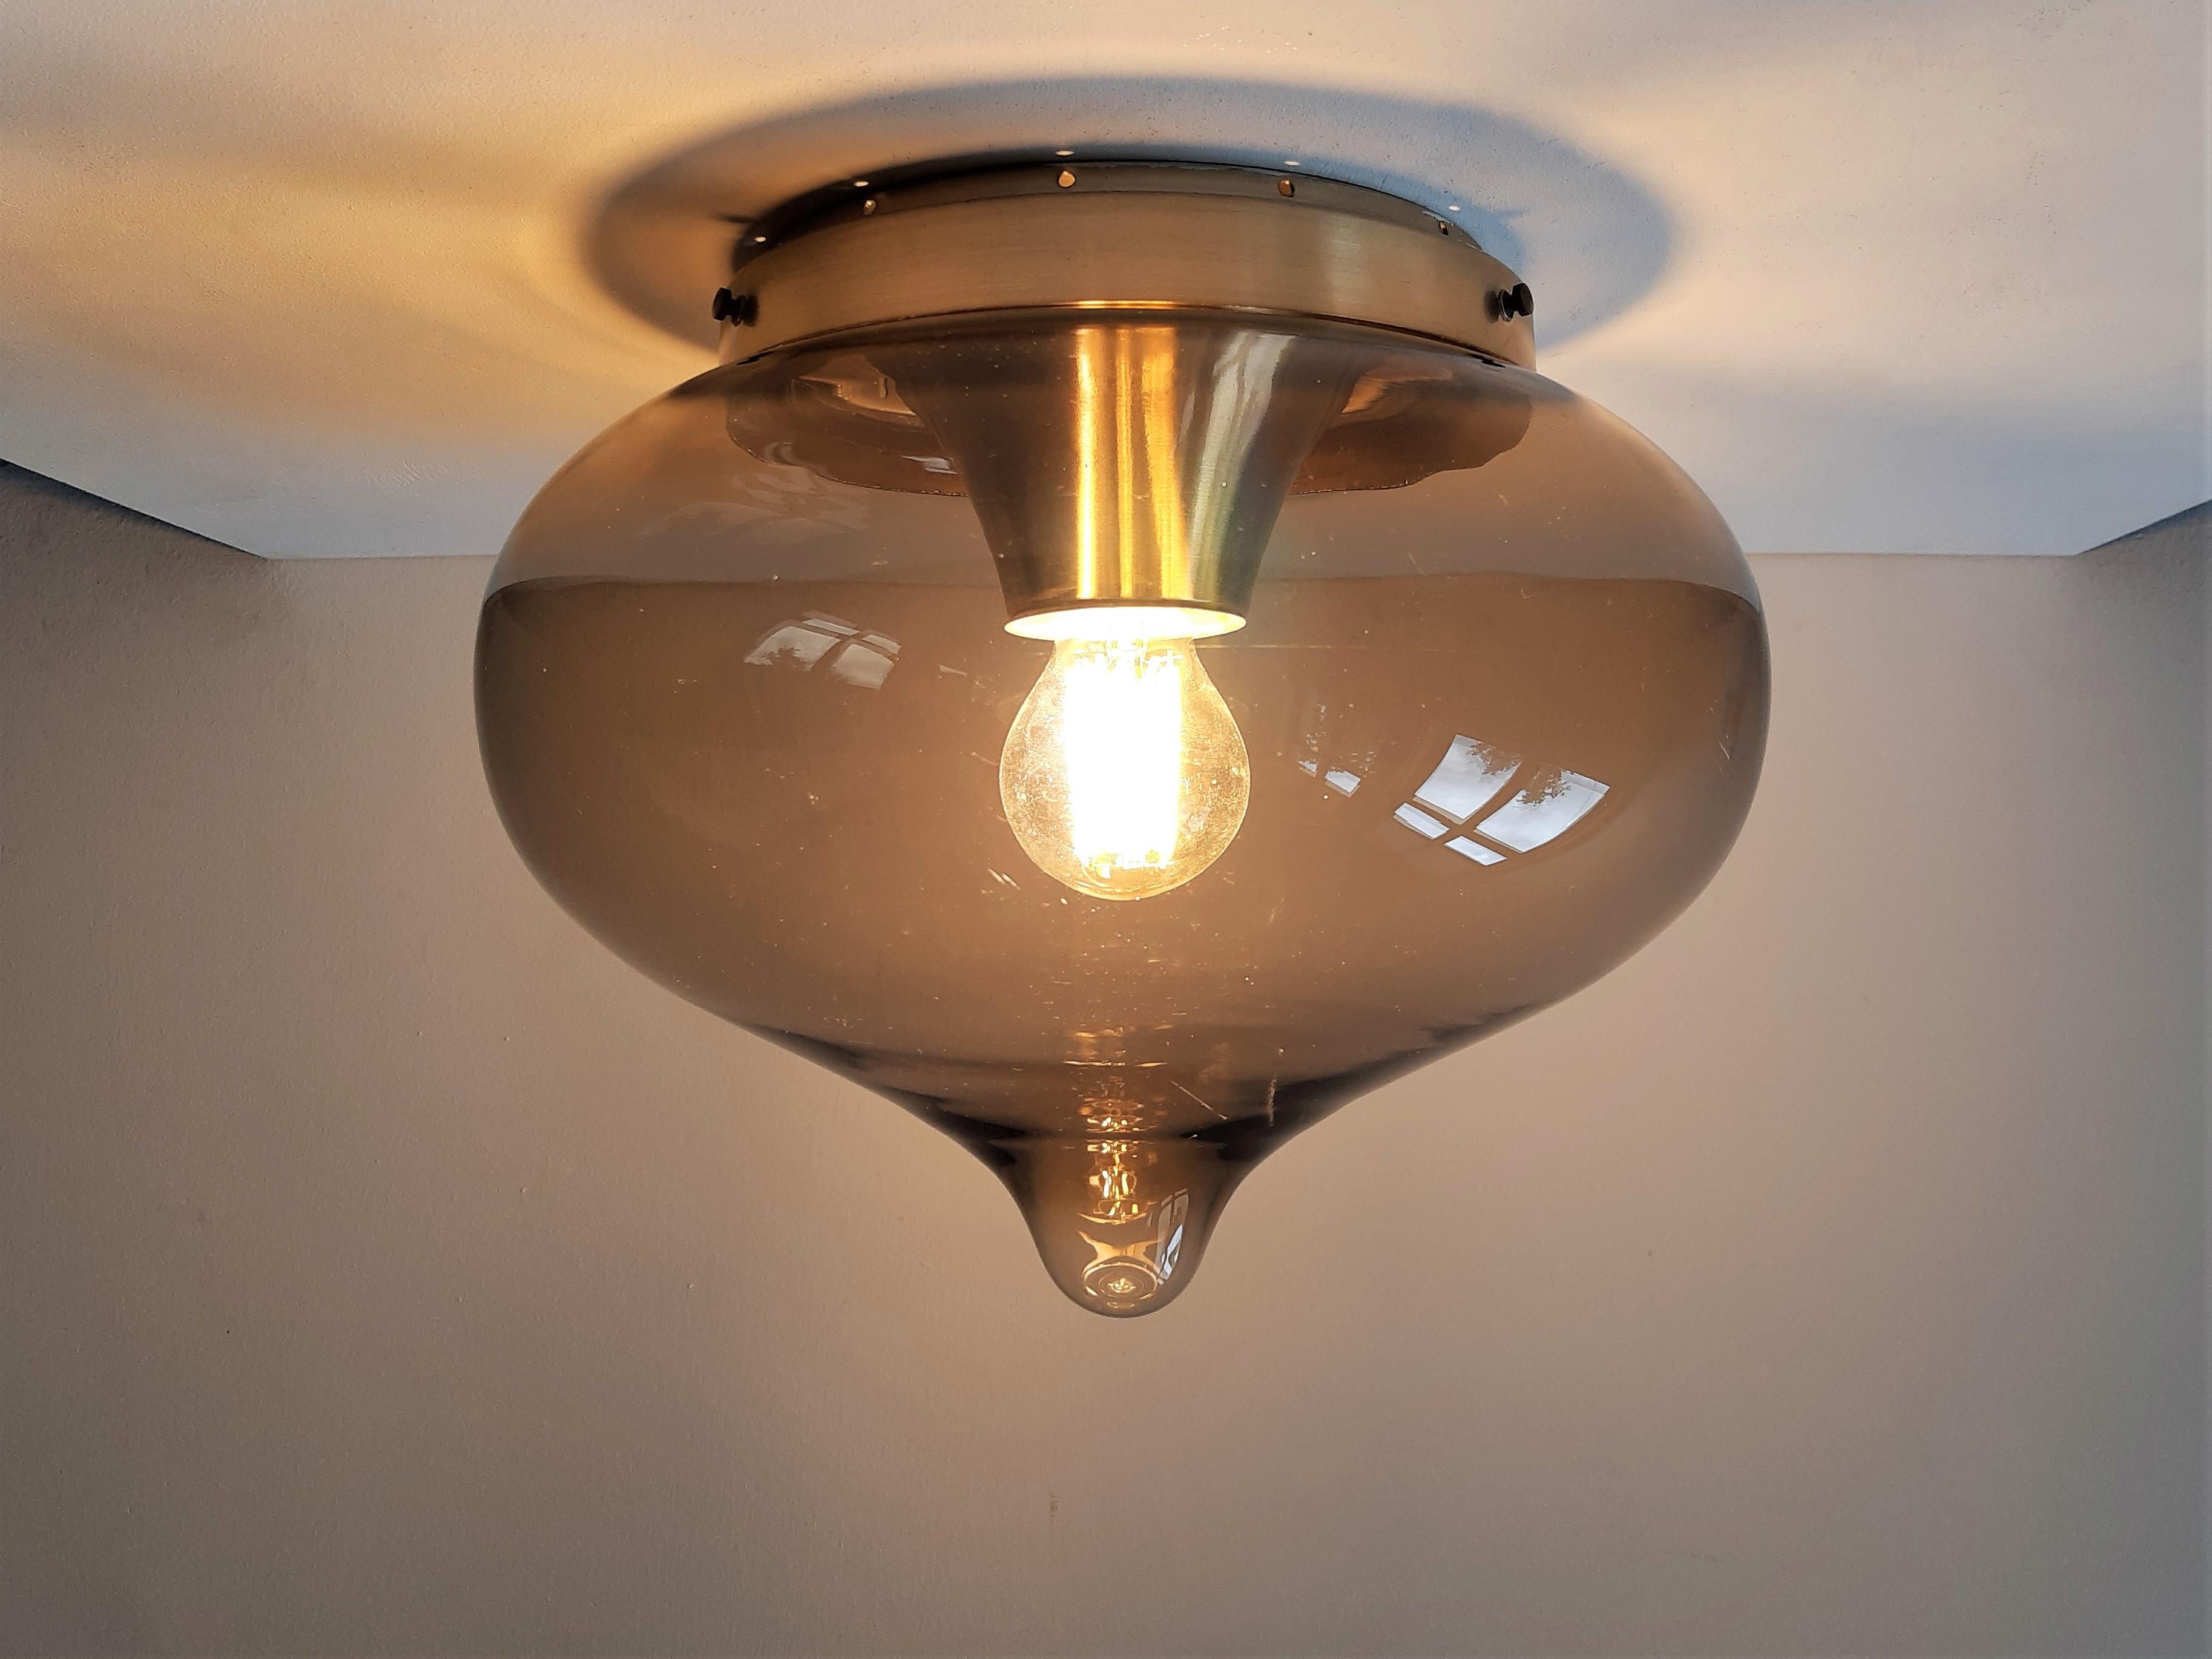 Dutch 'Droplet' Ceiling Lamp by Dijkstra Lighting, the Netherlands, 1960's/1970's